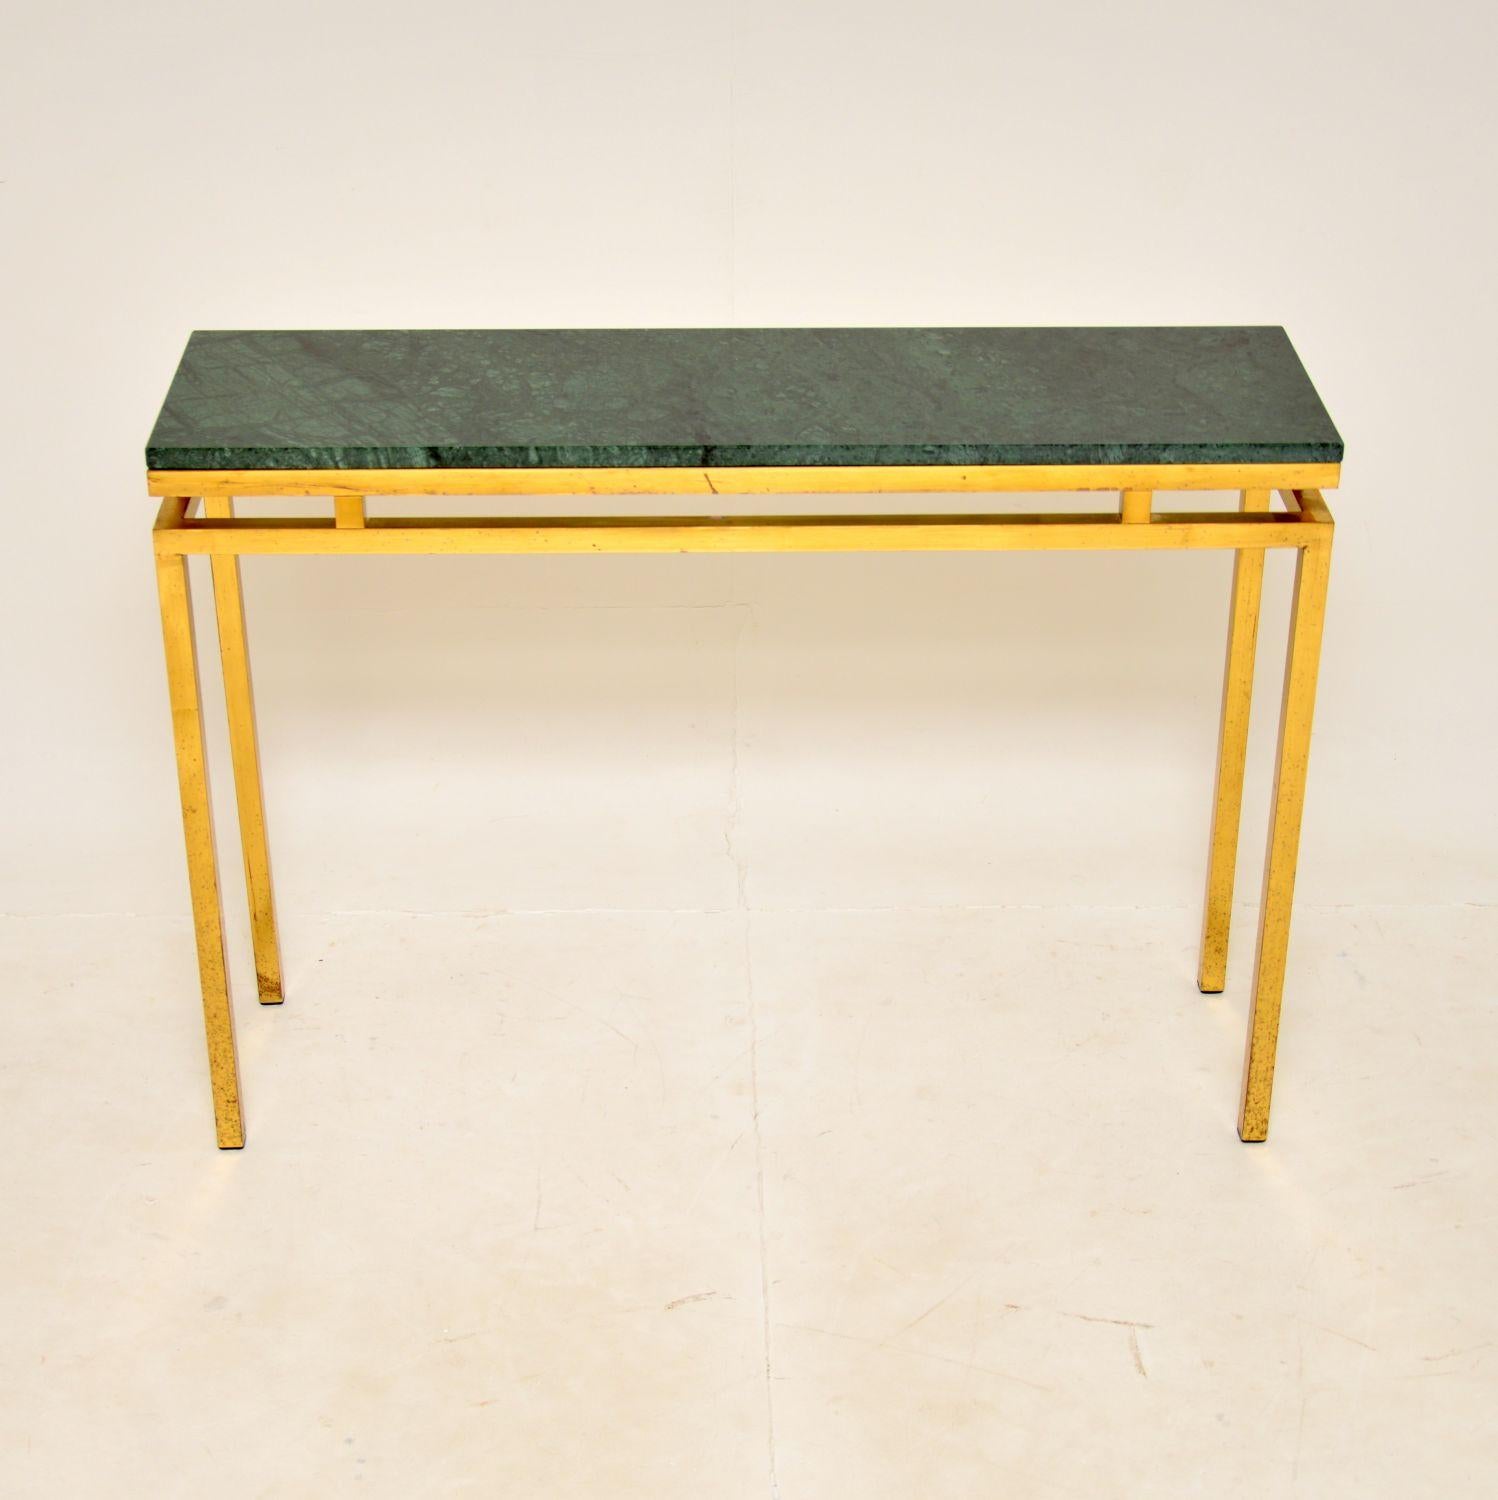 A fantastic vintage console table in solid brass and marble. This was made in France, it dates from the 1970’s.

It is of great quality with a very stylish design. The brass frame is nicely finished on both sides, so this can be used as a free